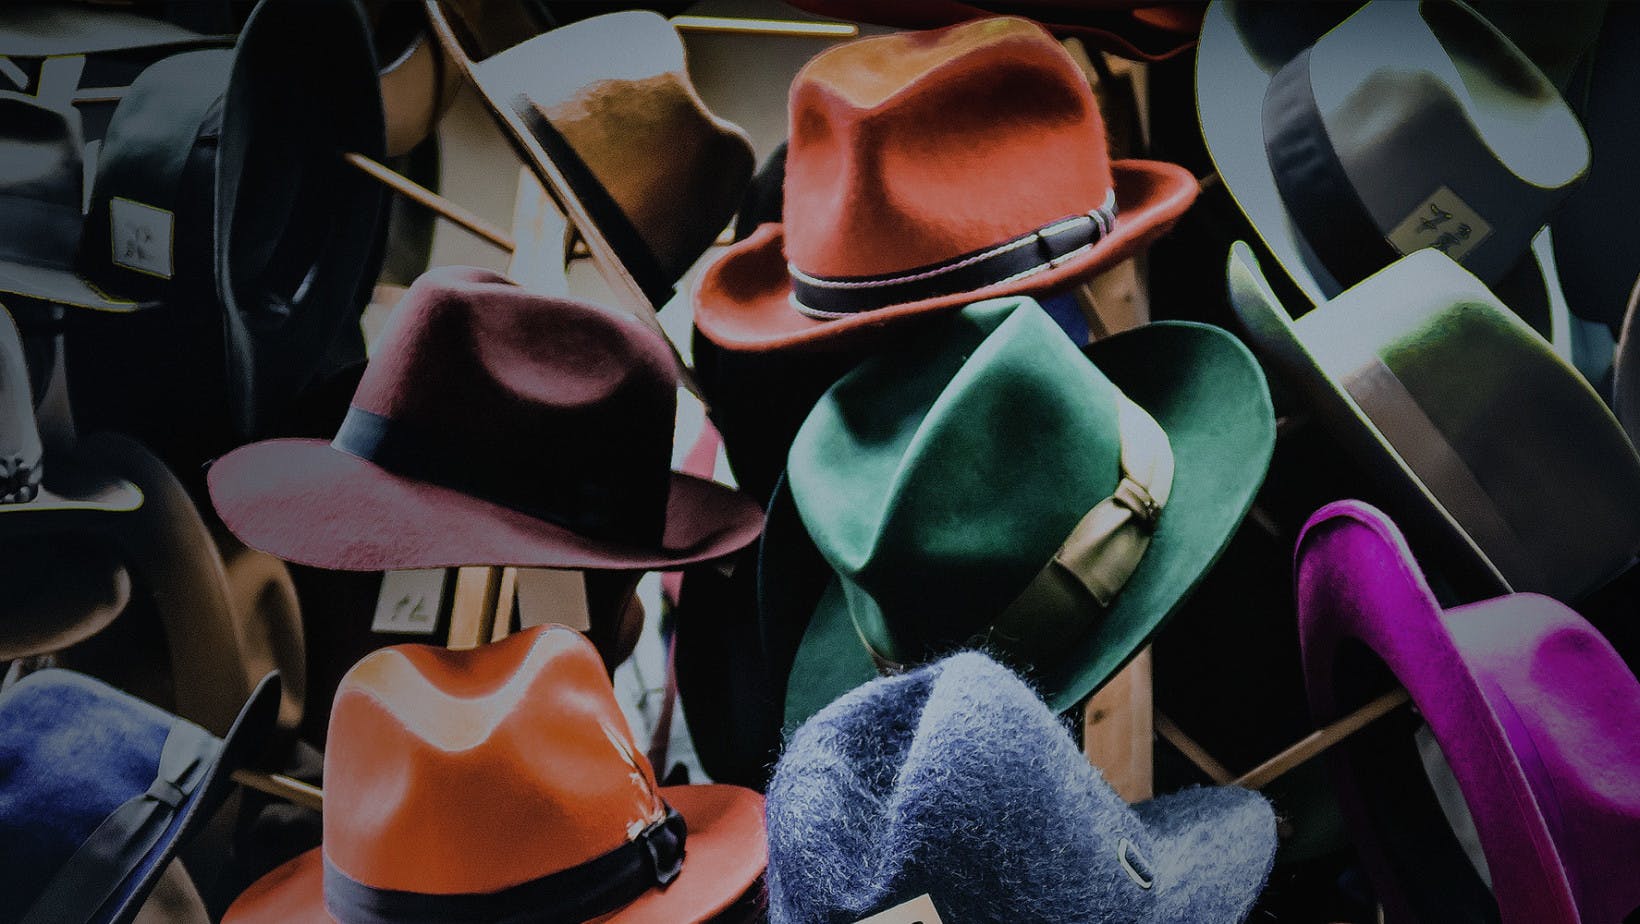 hats hanging on a hat rack representing supply and what is the law of supply